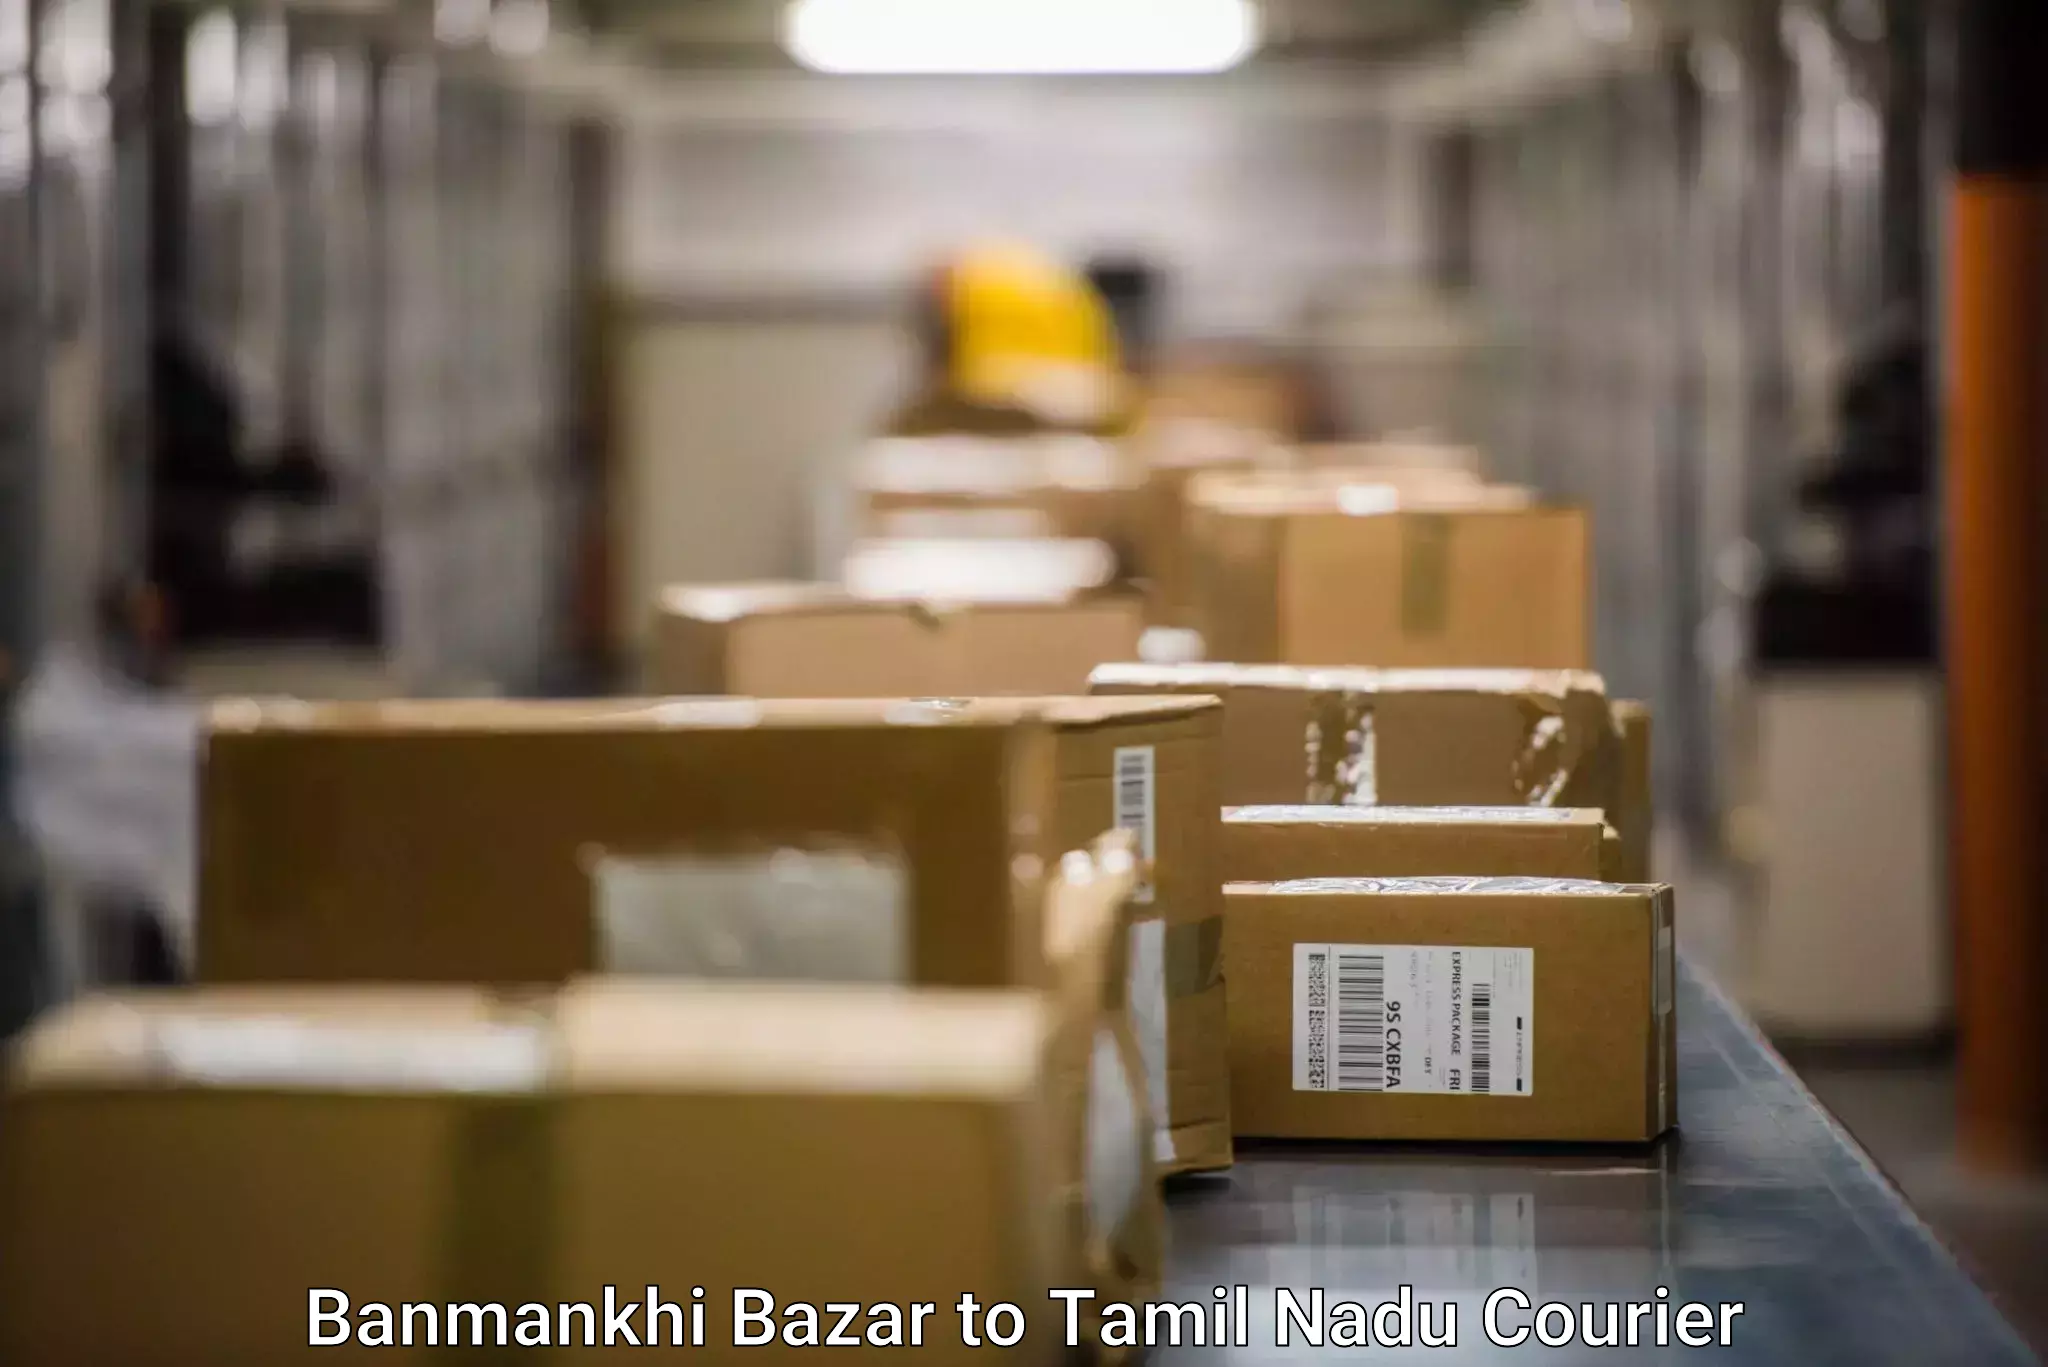 Special handling courier Banmankhi Bazar to Meenakshi Academy of Higher Education and Research Chennai